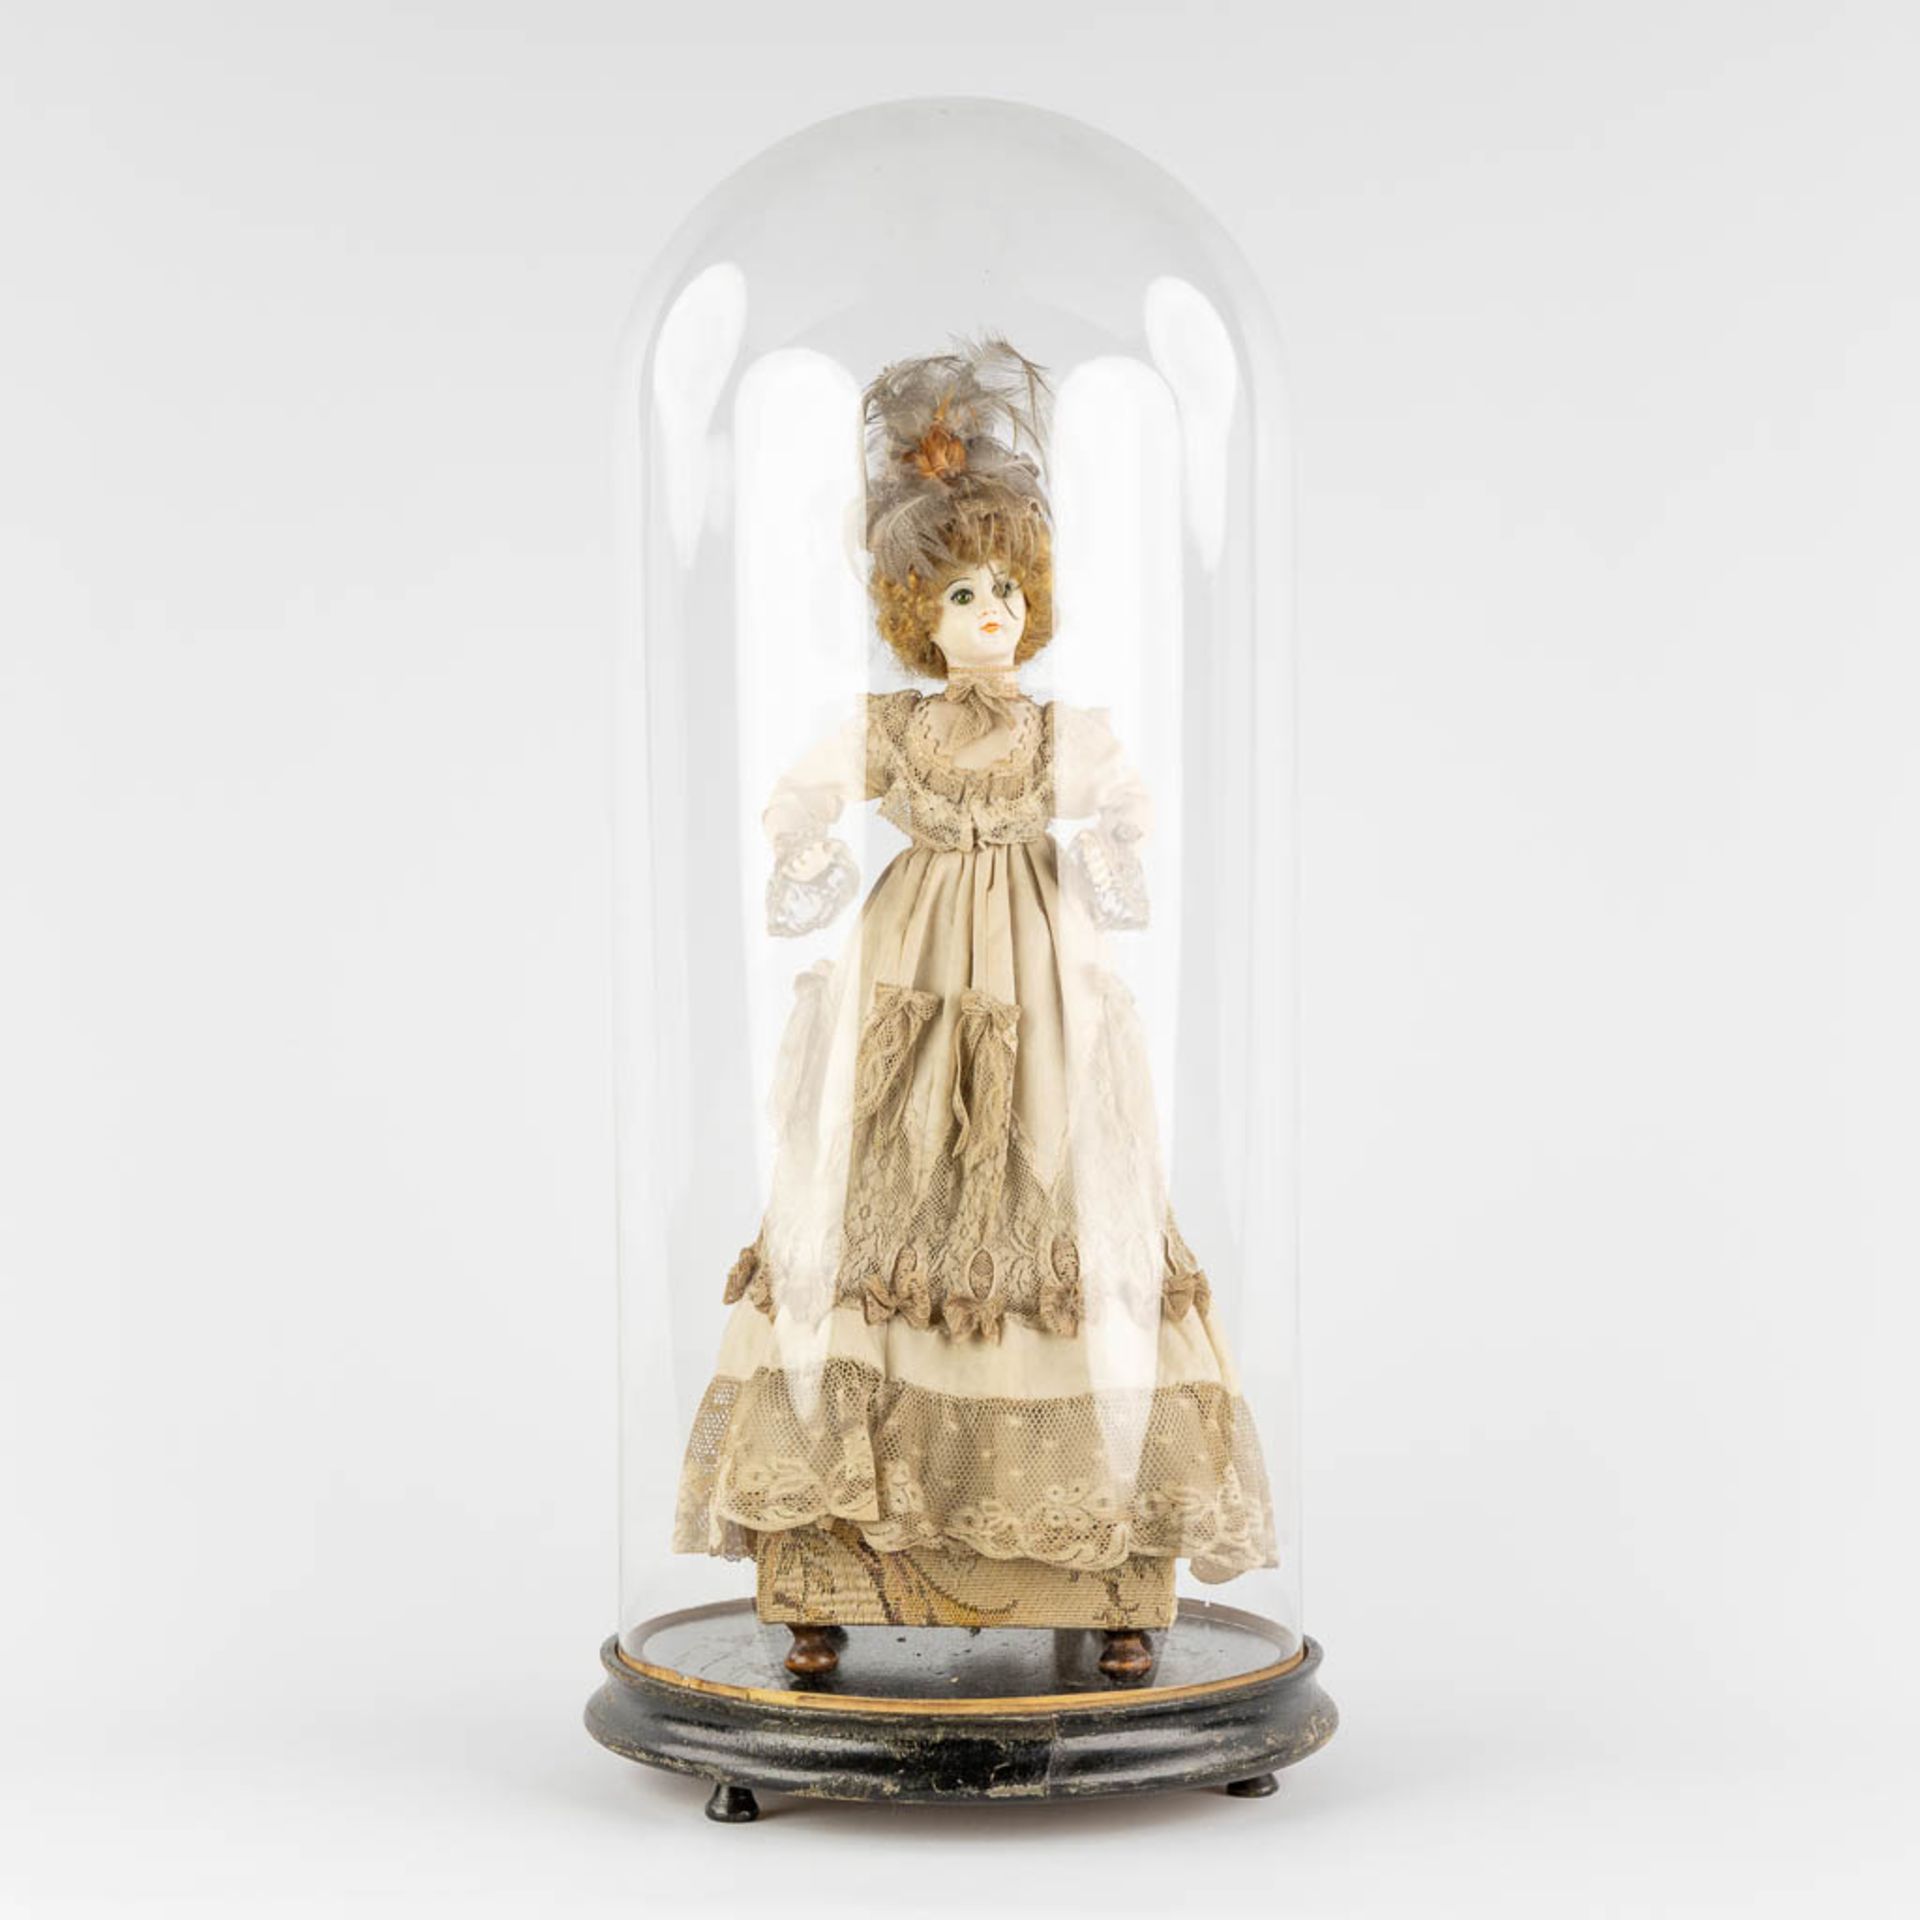 An antique 'Automata', in lace dressed doll with a music box. Under a glass dome, Circa 1920. (H:48